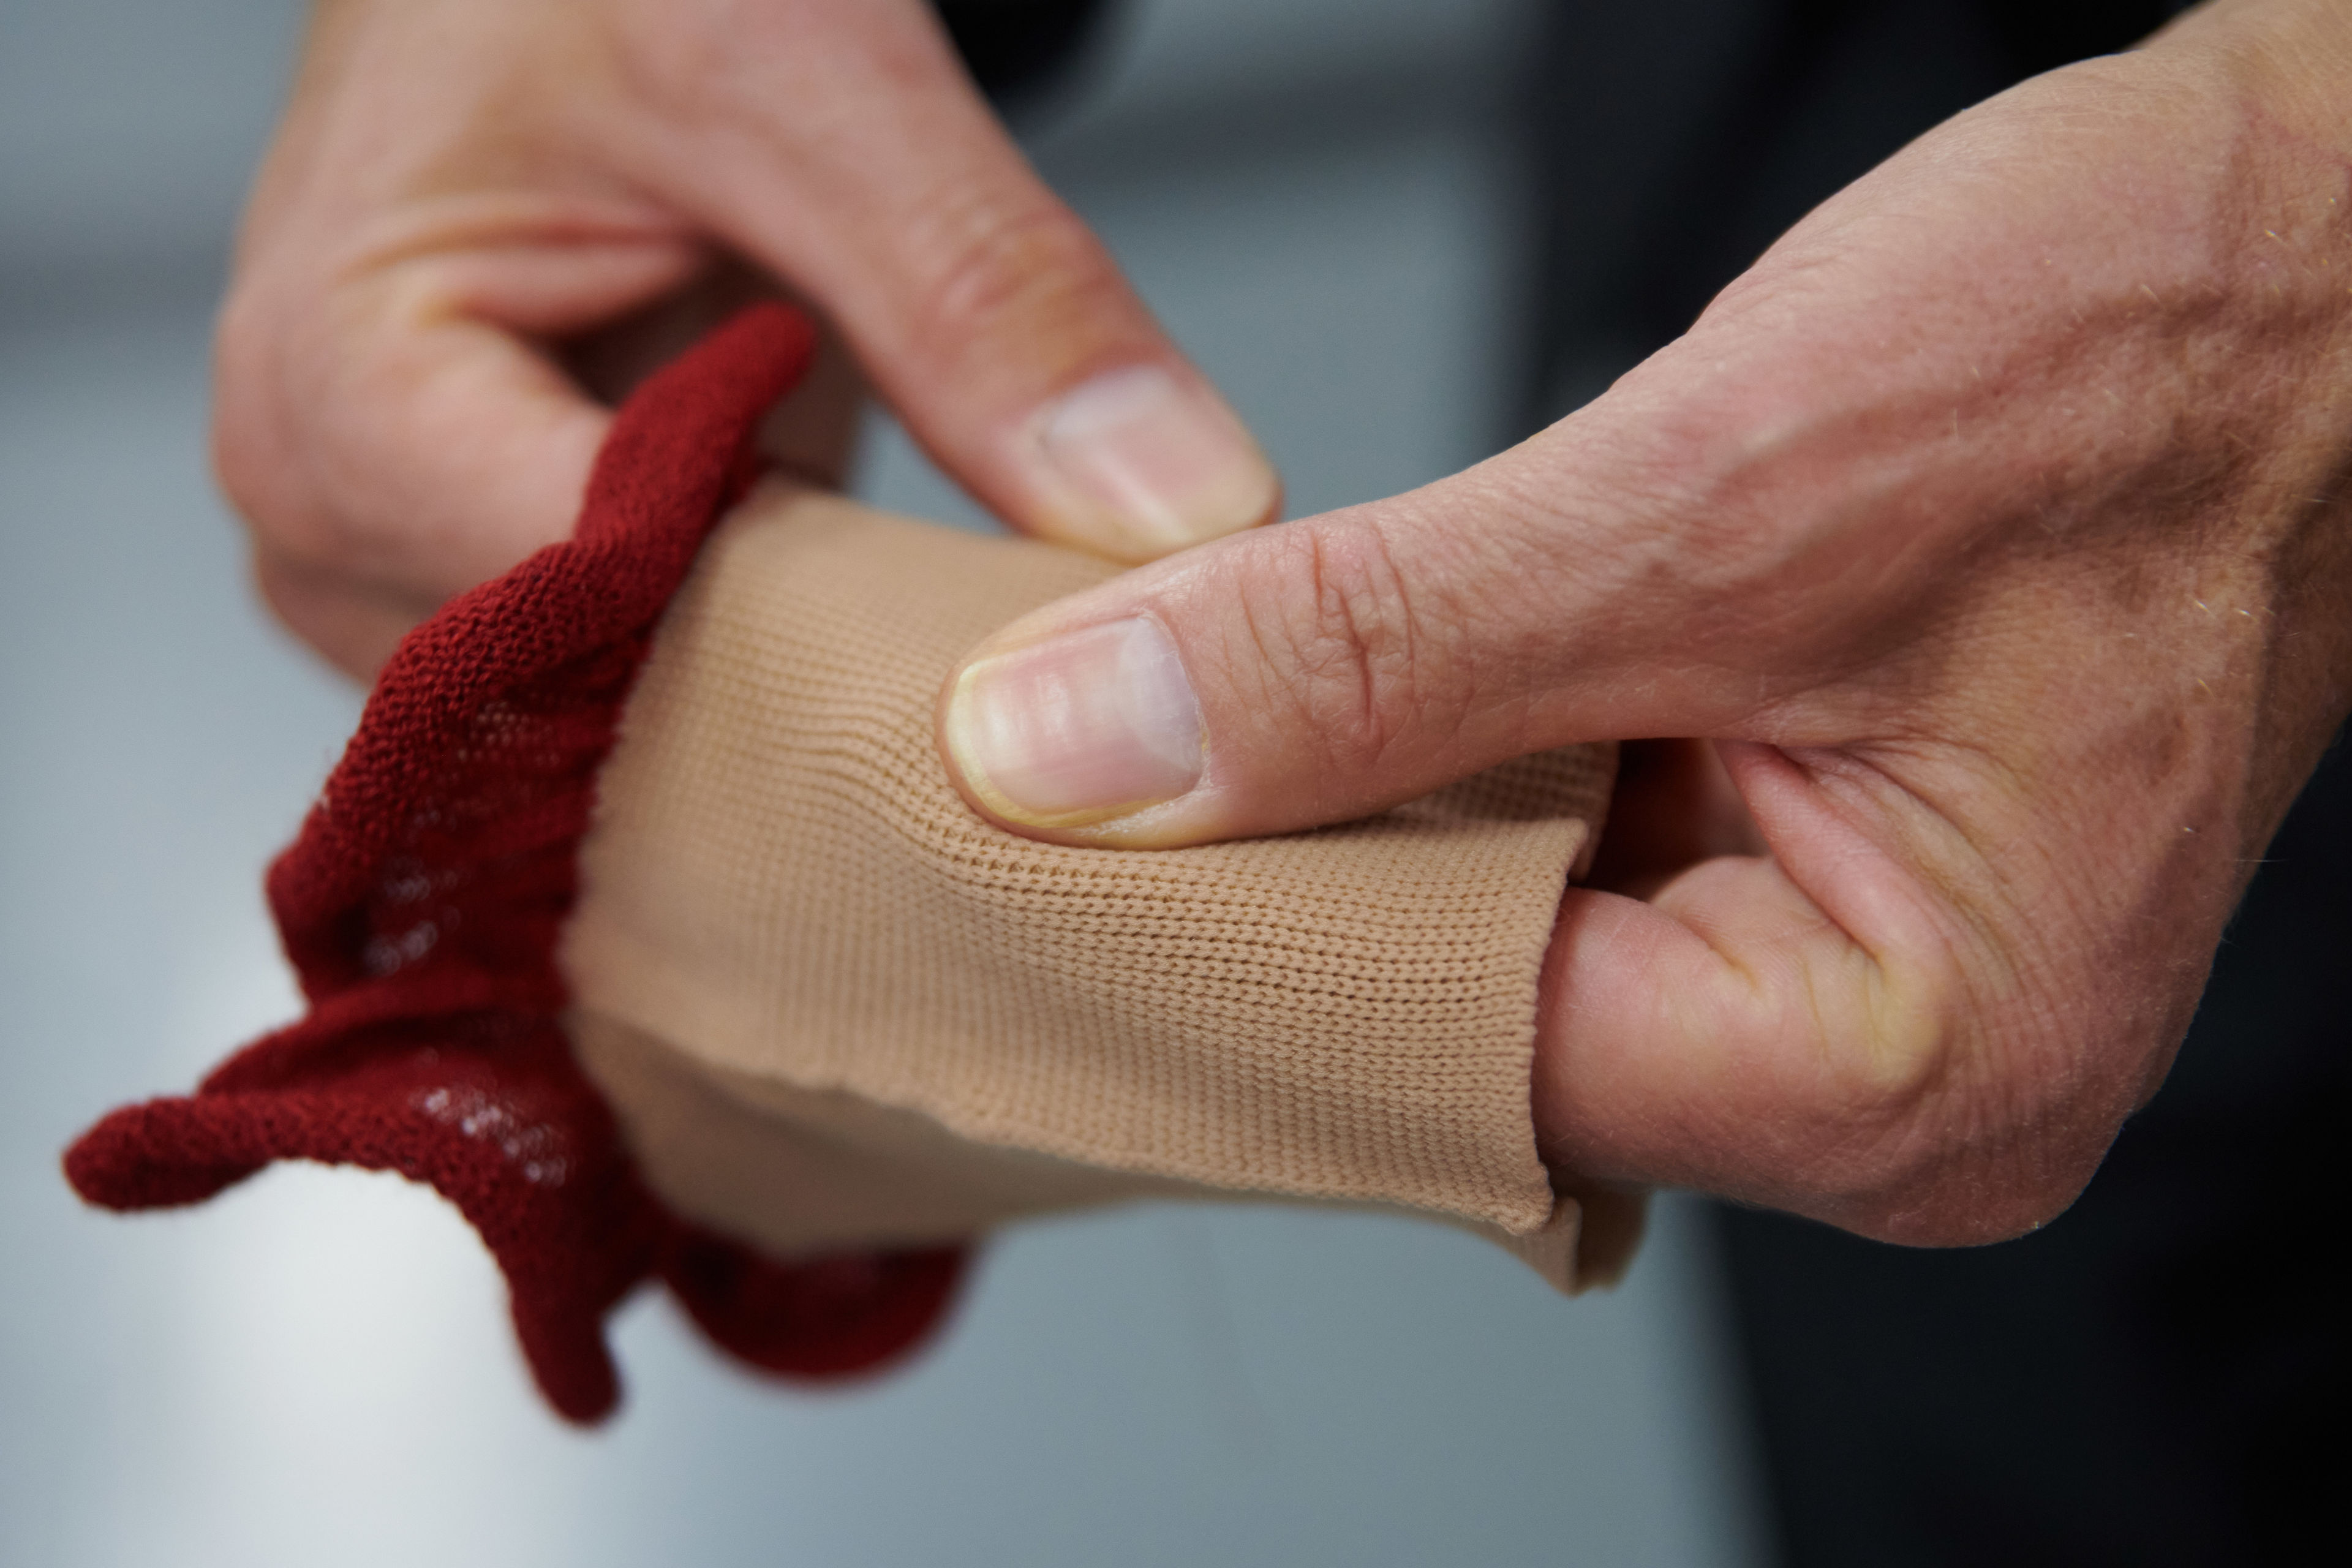 Medical products, such as compression bandages, are also knitted on the machines built in Vionnaz, Valais, Switzerland